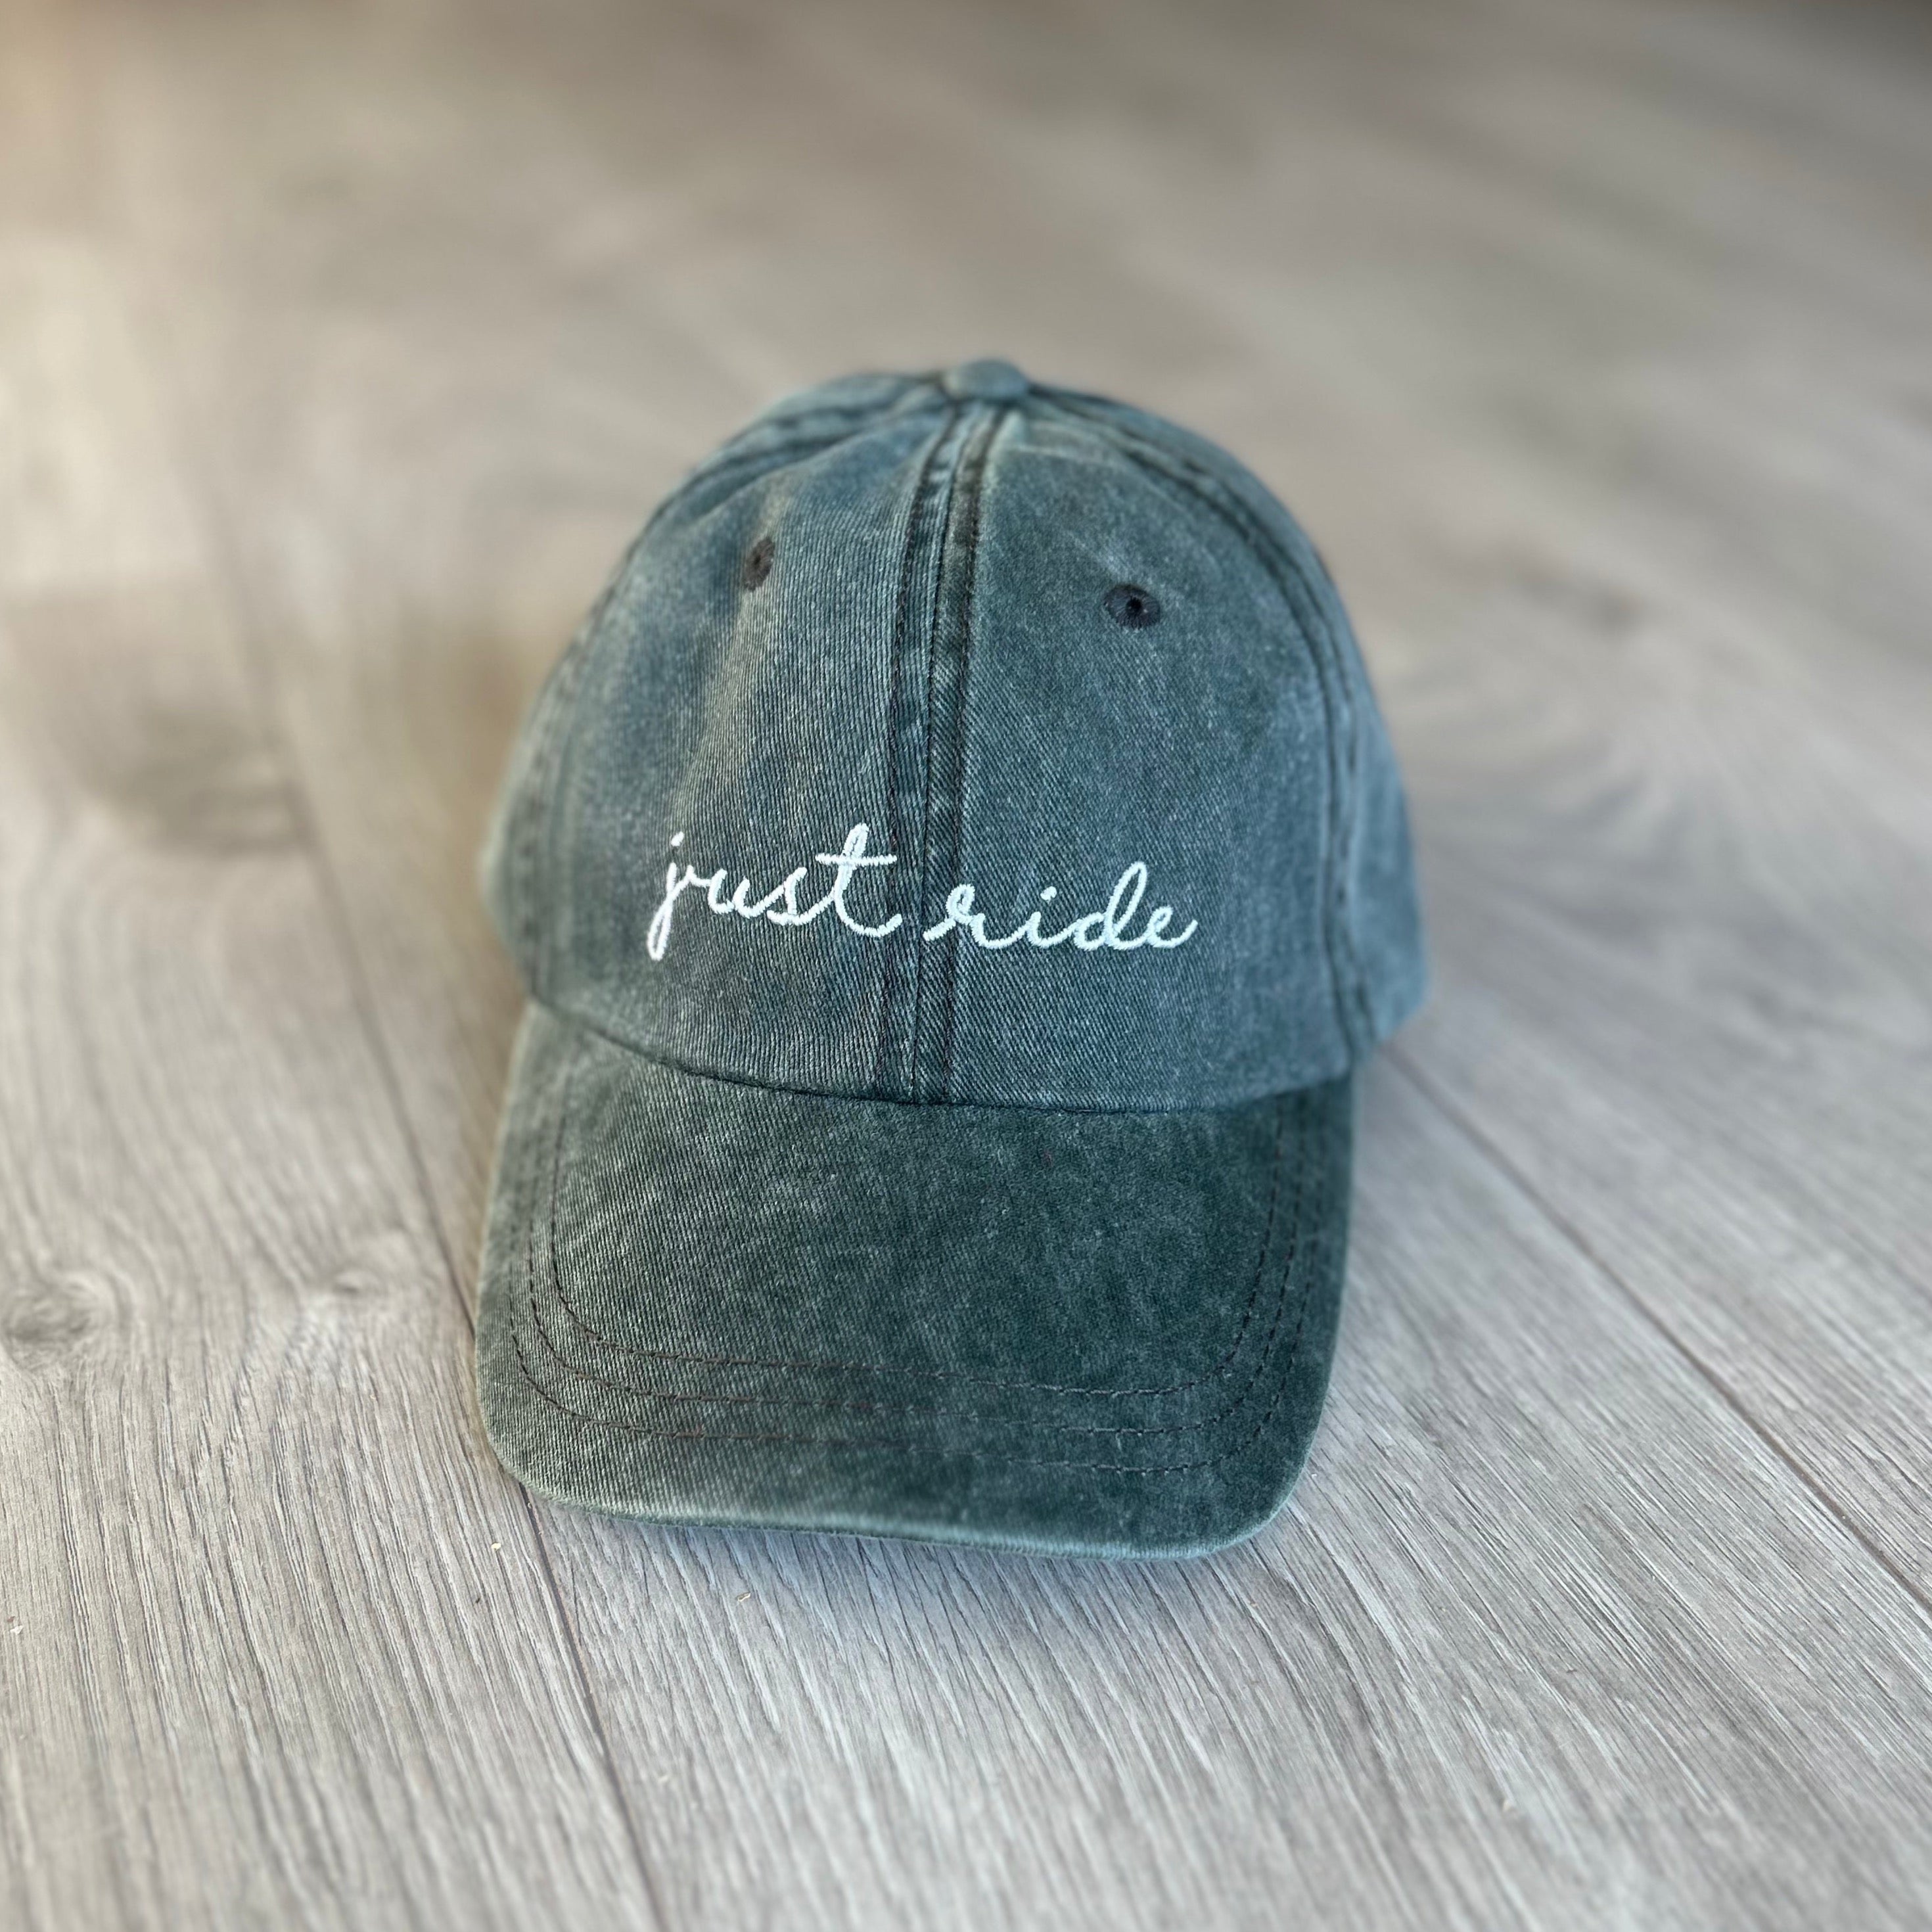 Green baseball cap with embroidered text "Just Ride" in white